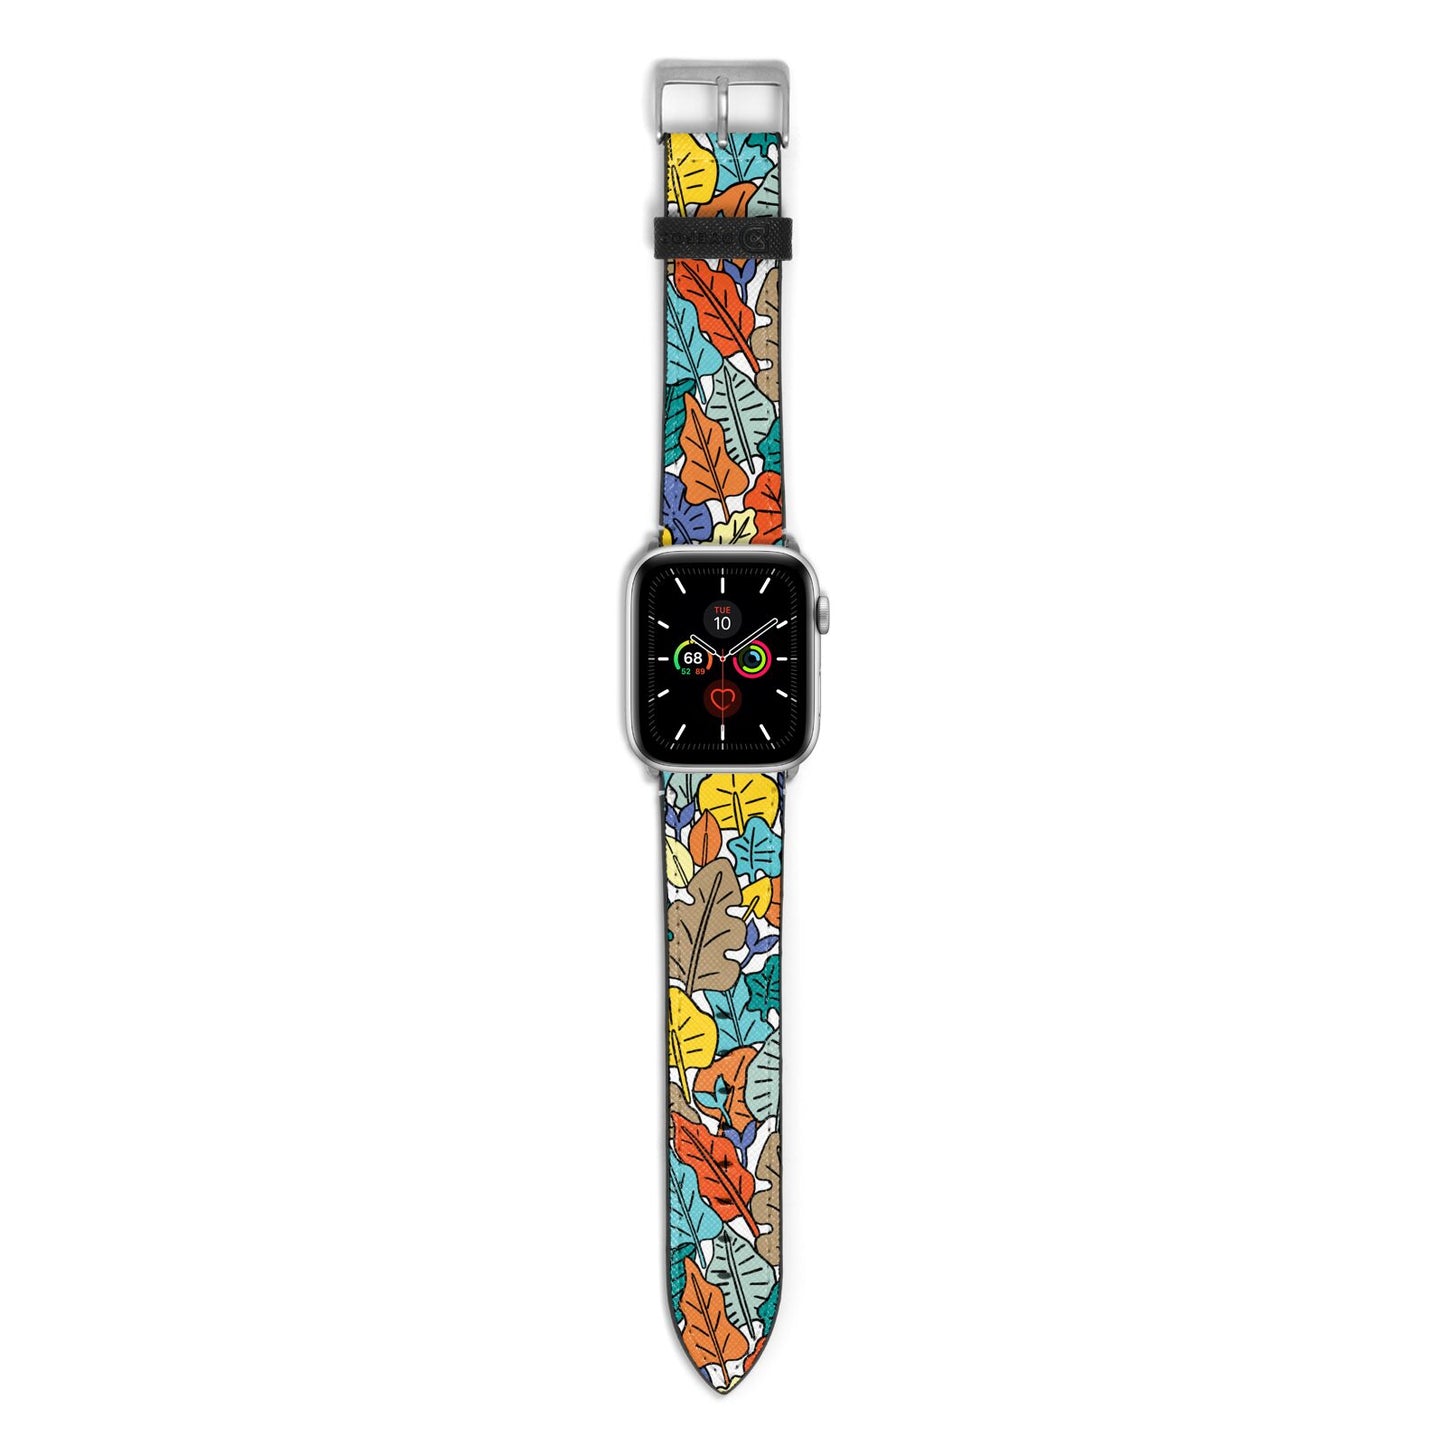 Autumn Leaves Apple Watch Strap with Silver Hardware